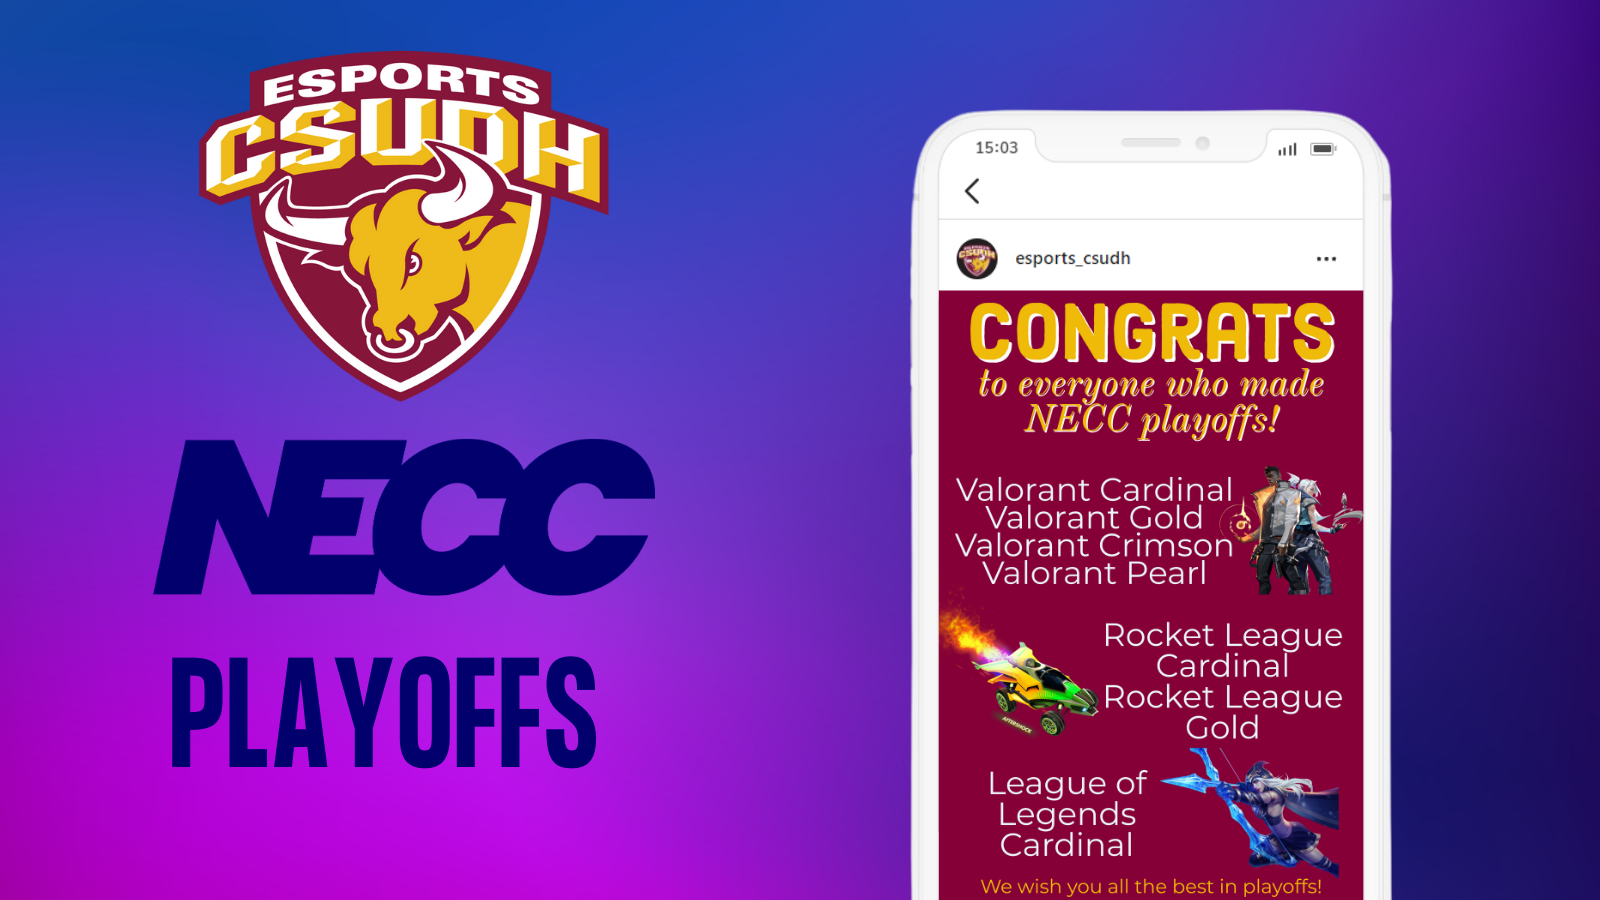 Photo of Esports logo and Instagram post of NECC Playoffs